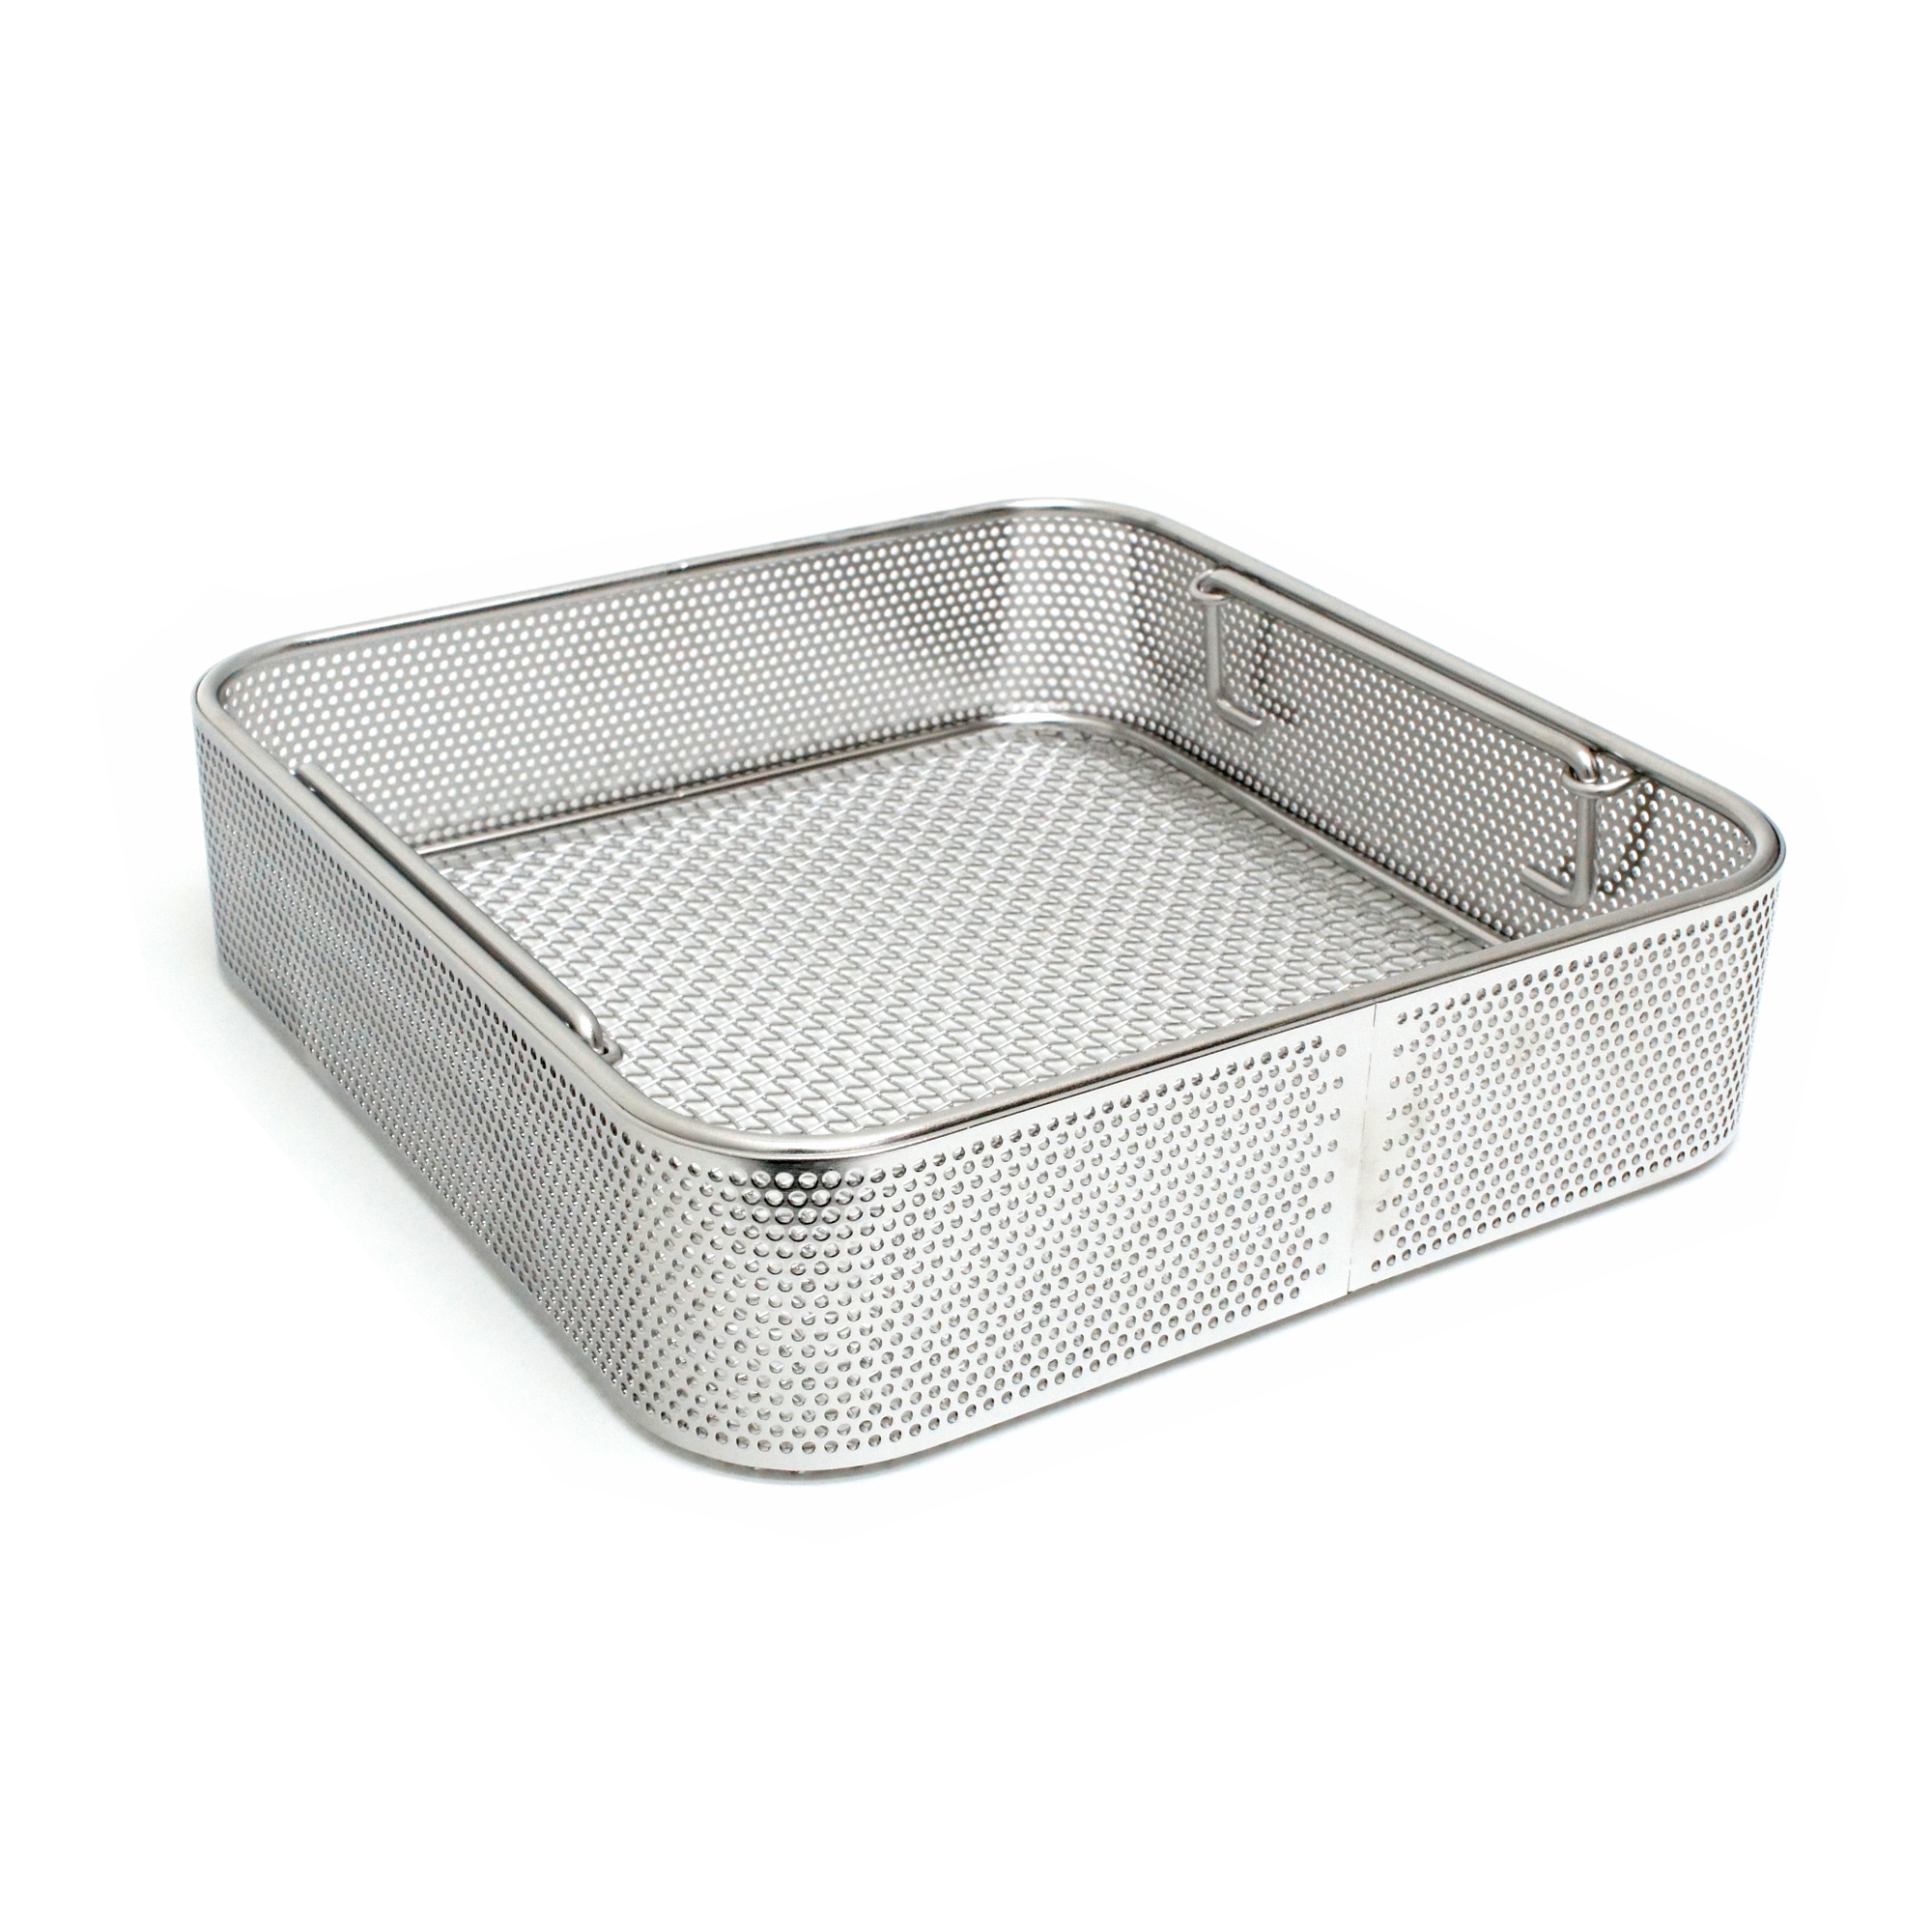 Perforated Plate Mesh Tray Image